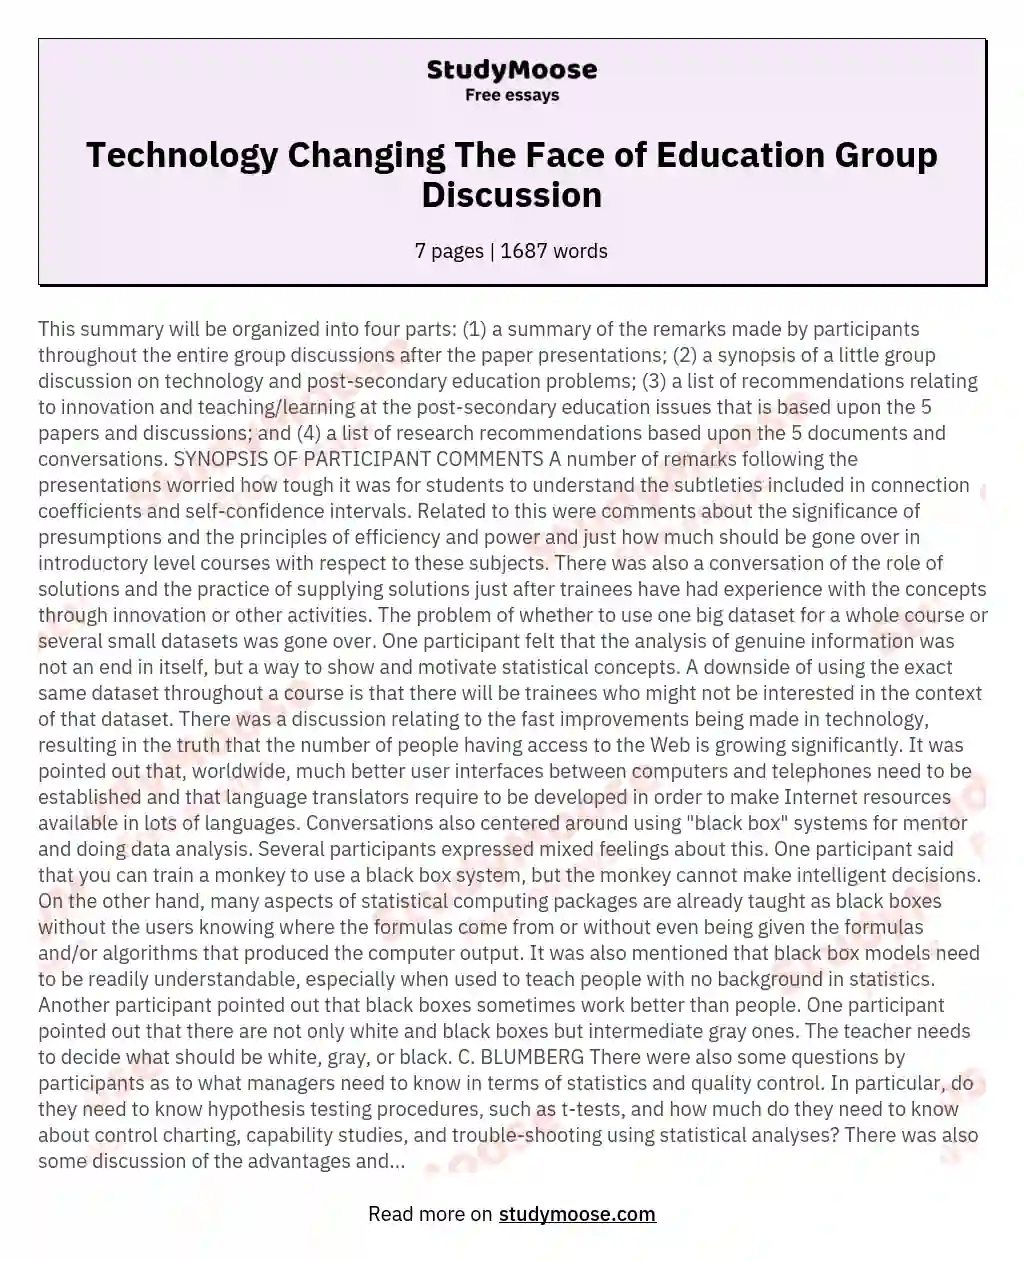 Technology Changing The Face of Education Group Discussion essay